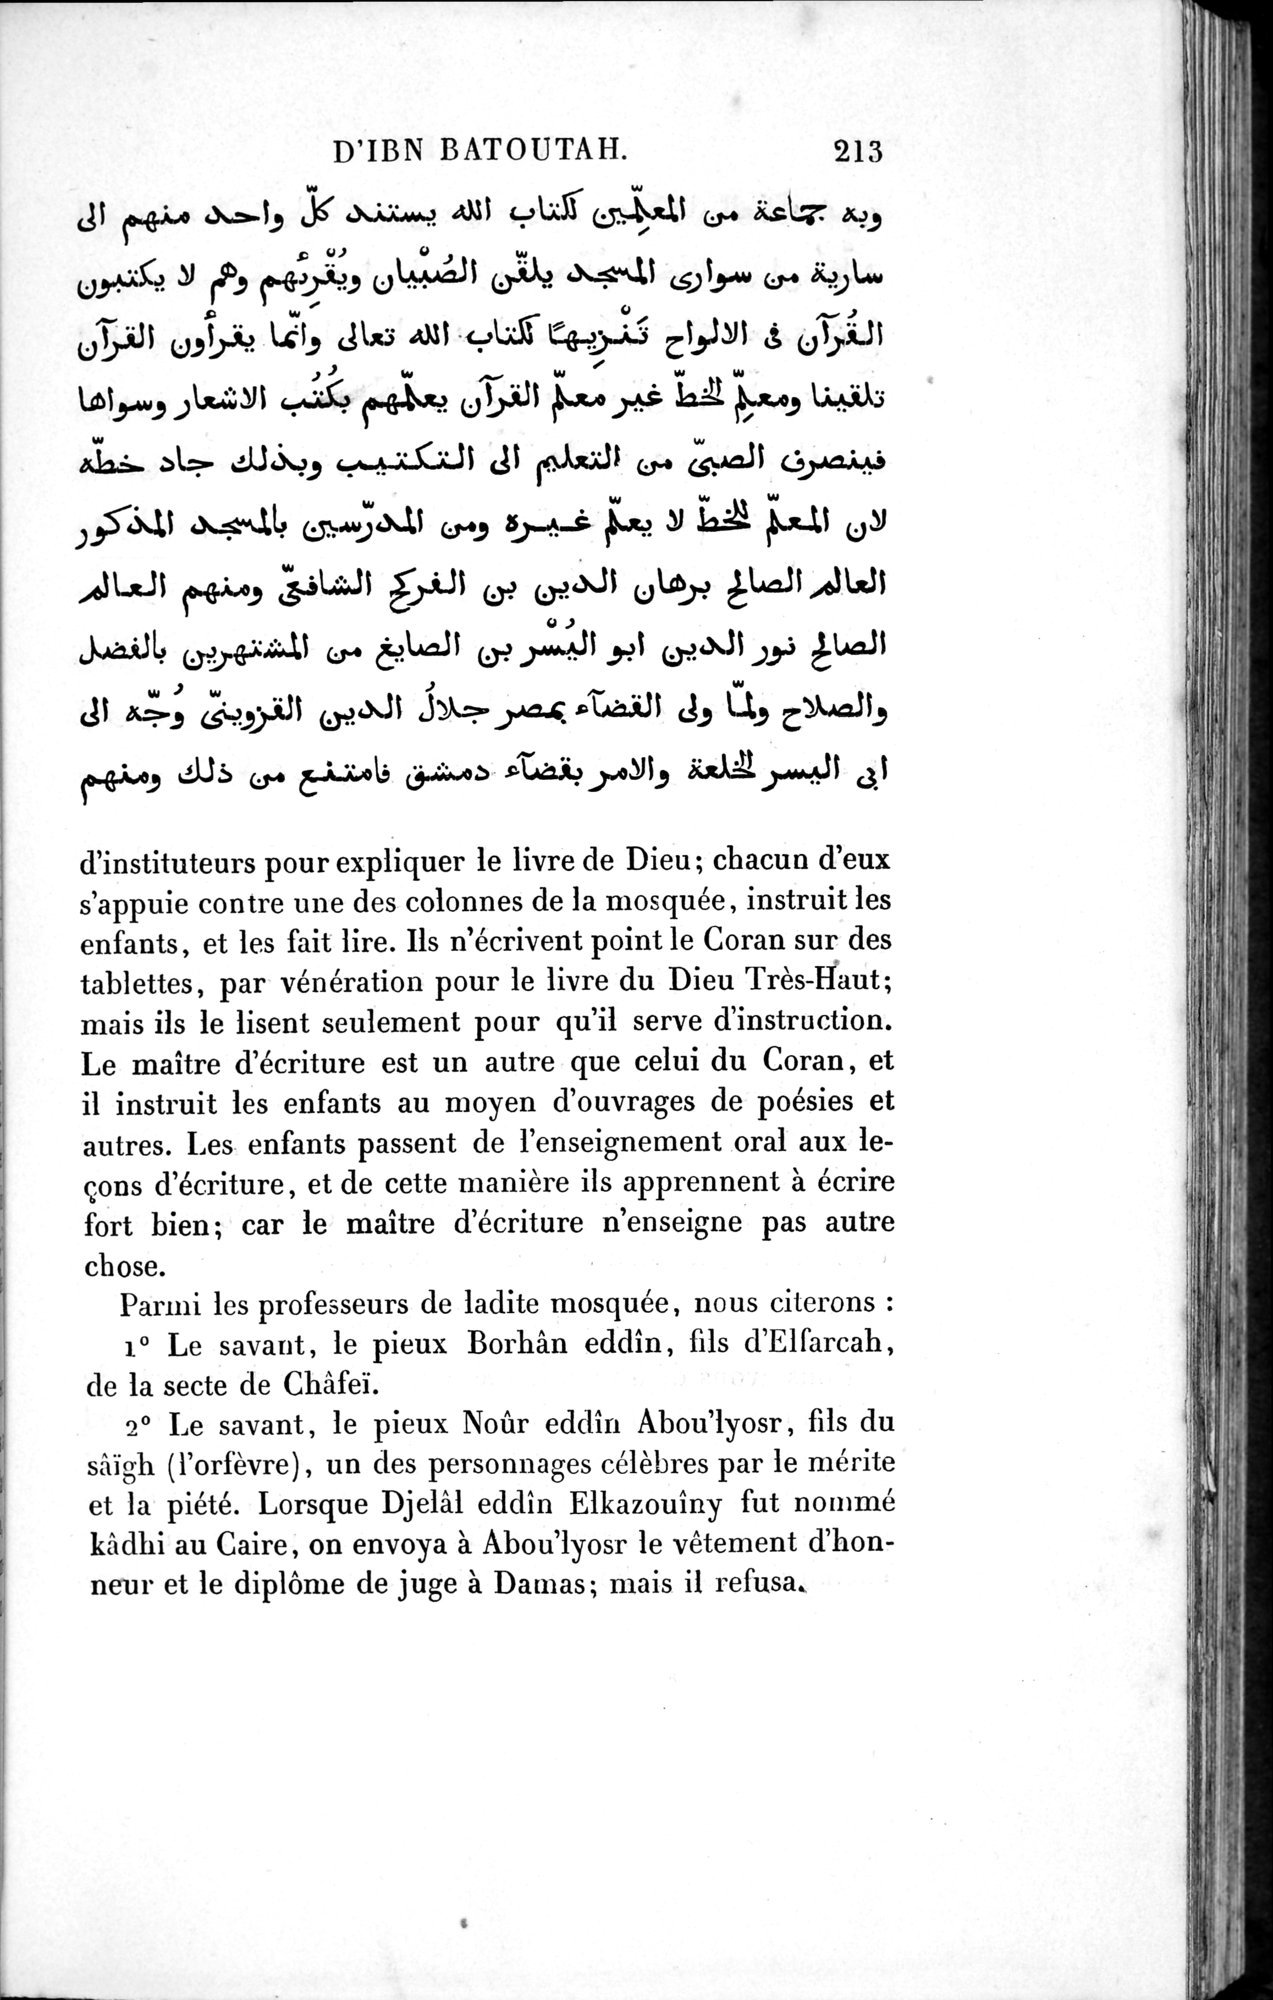 Voyages d'Ibn Batoutah : vol.1 / Page 273 (Grayscale High Resolution Image)